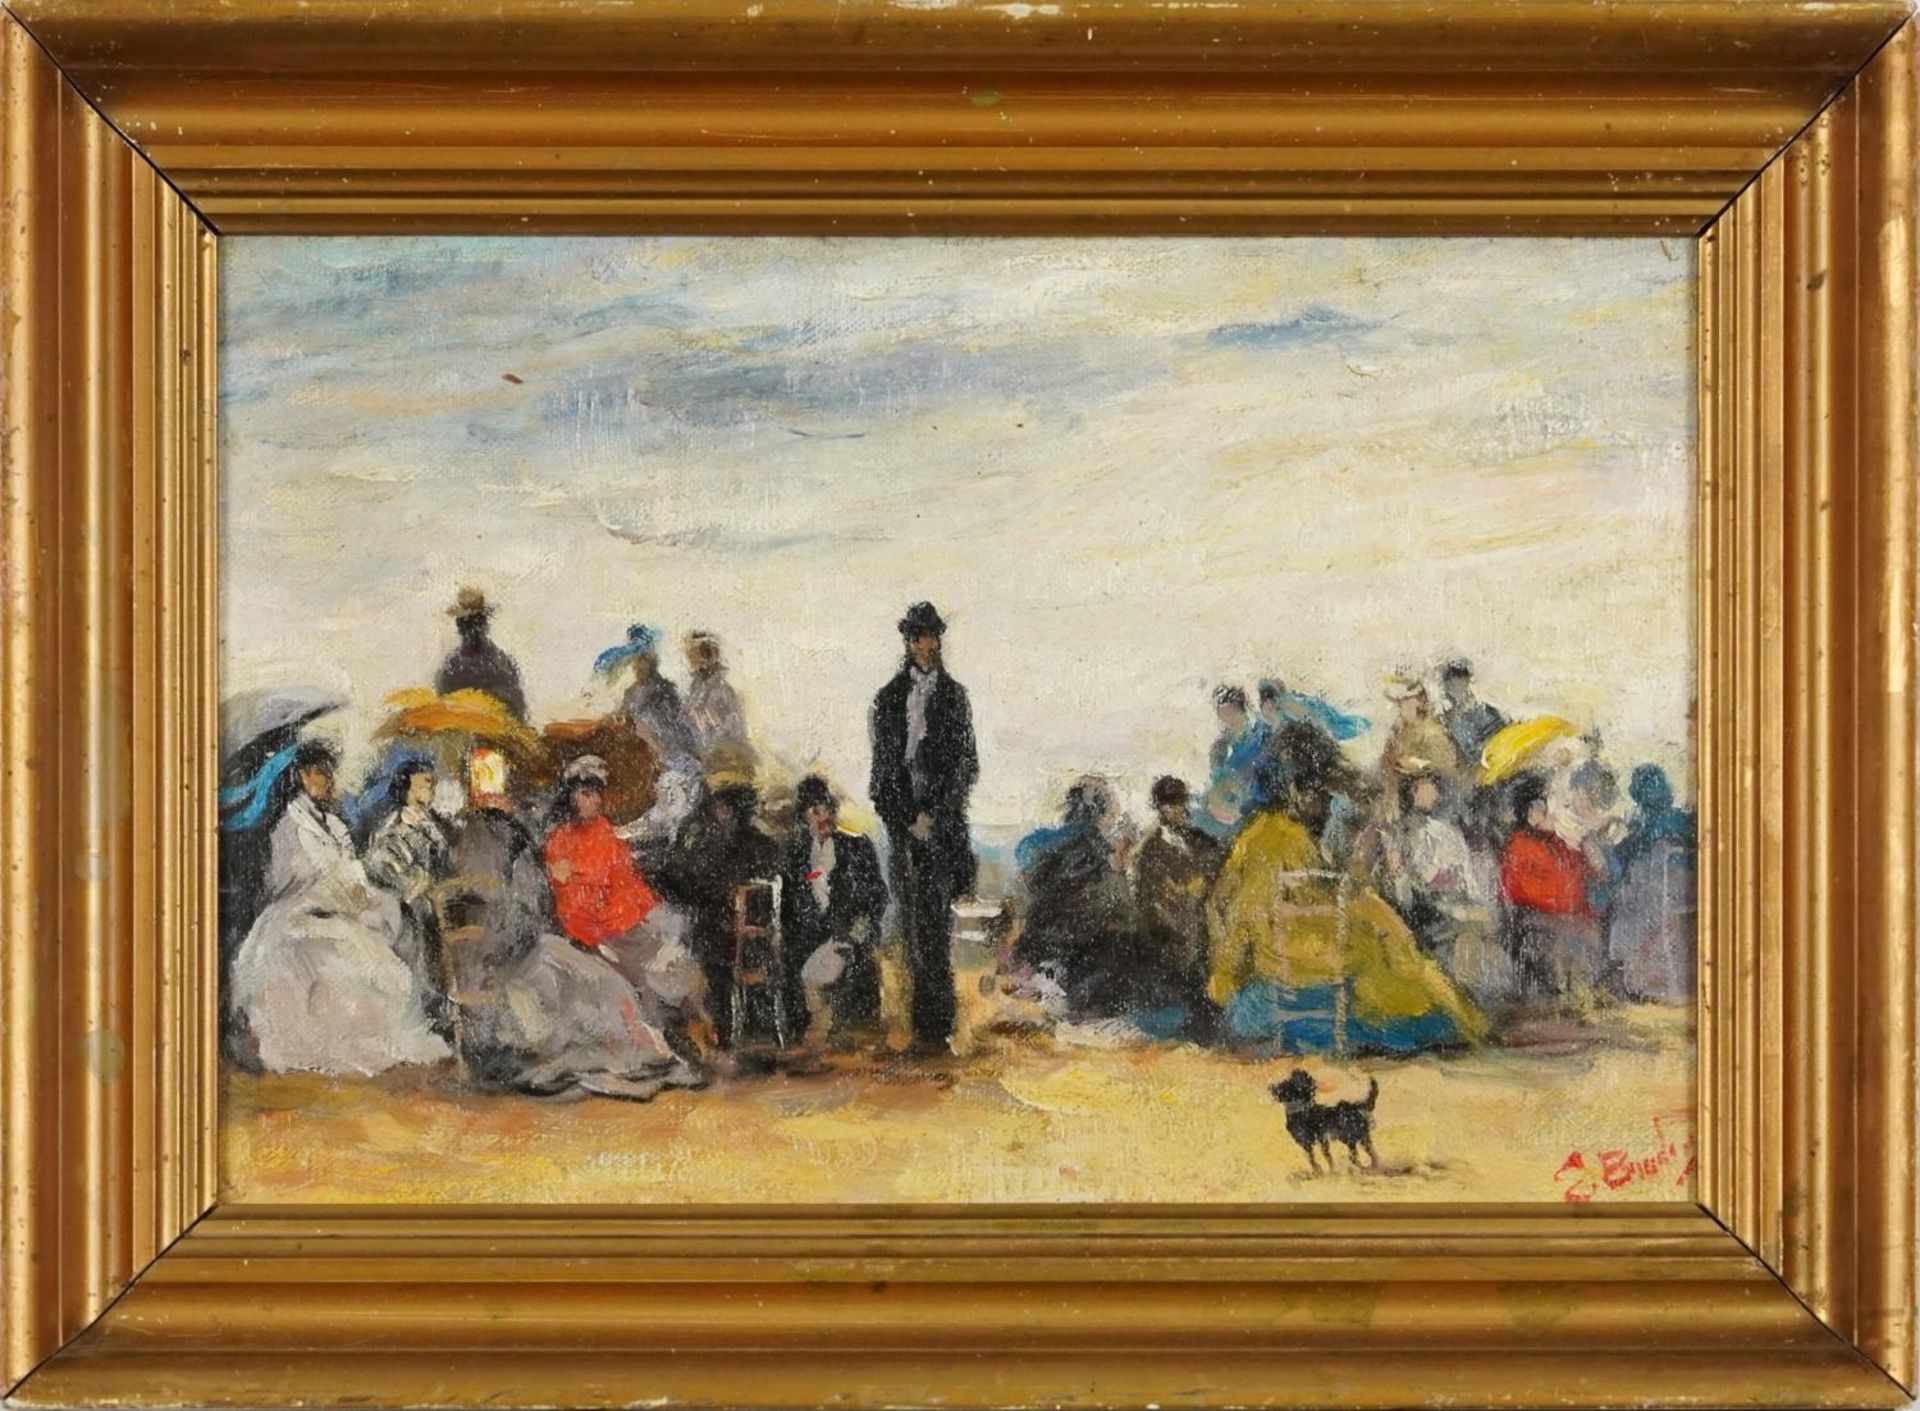 Busy beach scene, French Impressionist oil on canvas, mounted and framed, 29cm x 19.5cm excluding - Image 2 of 4